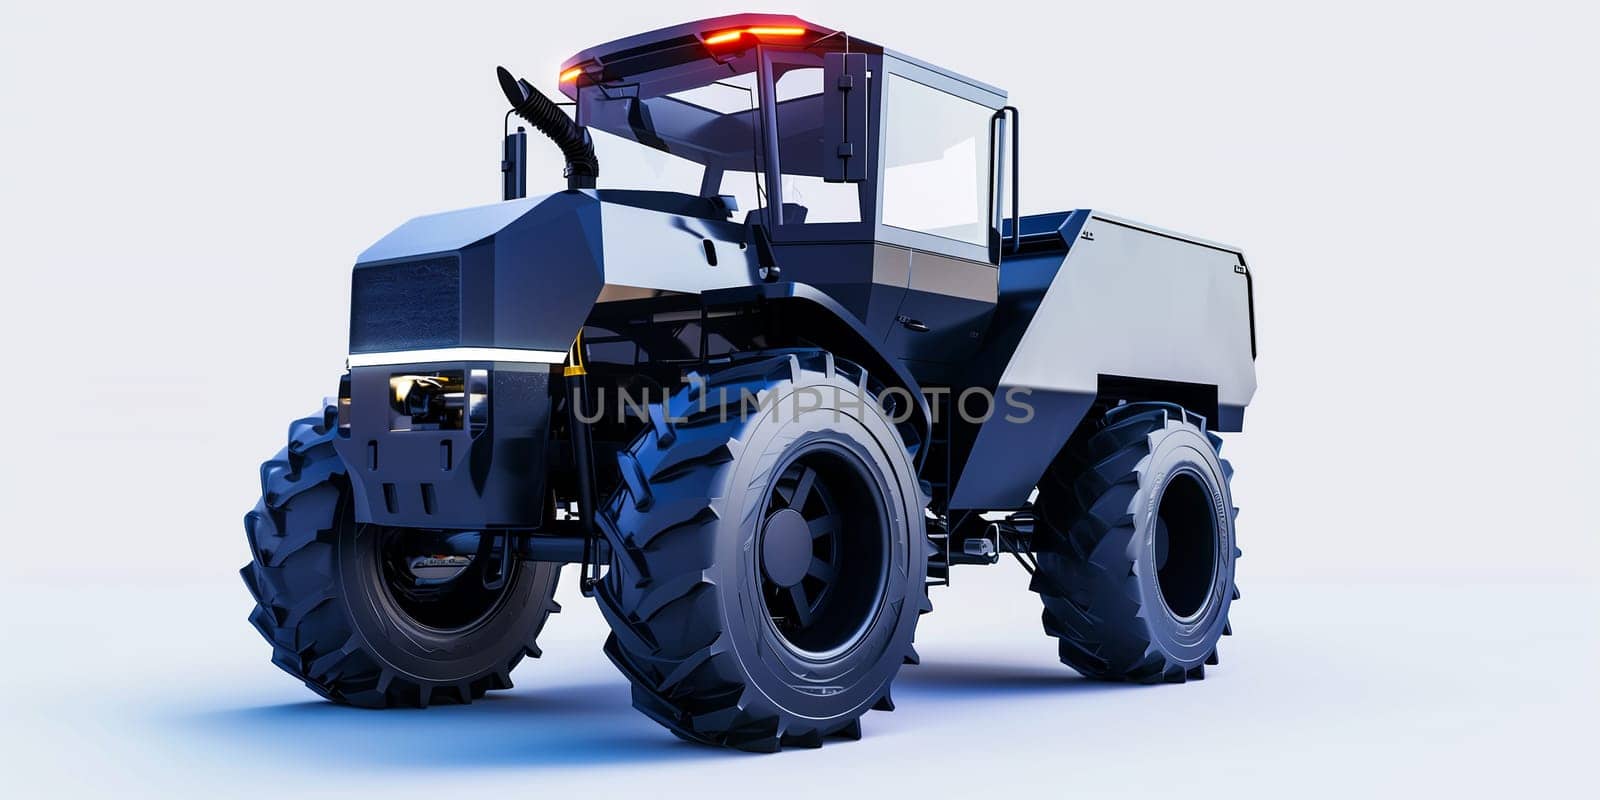 Modern Agriculture Tractor. A powerful vehicle used for various farm tasks, including plowing, tilling, planting, and transportation